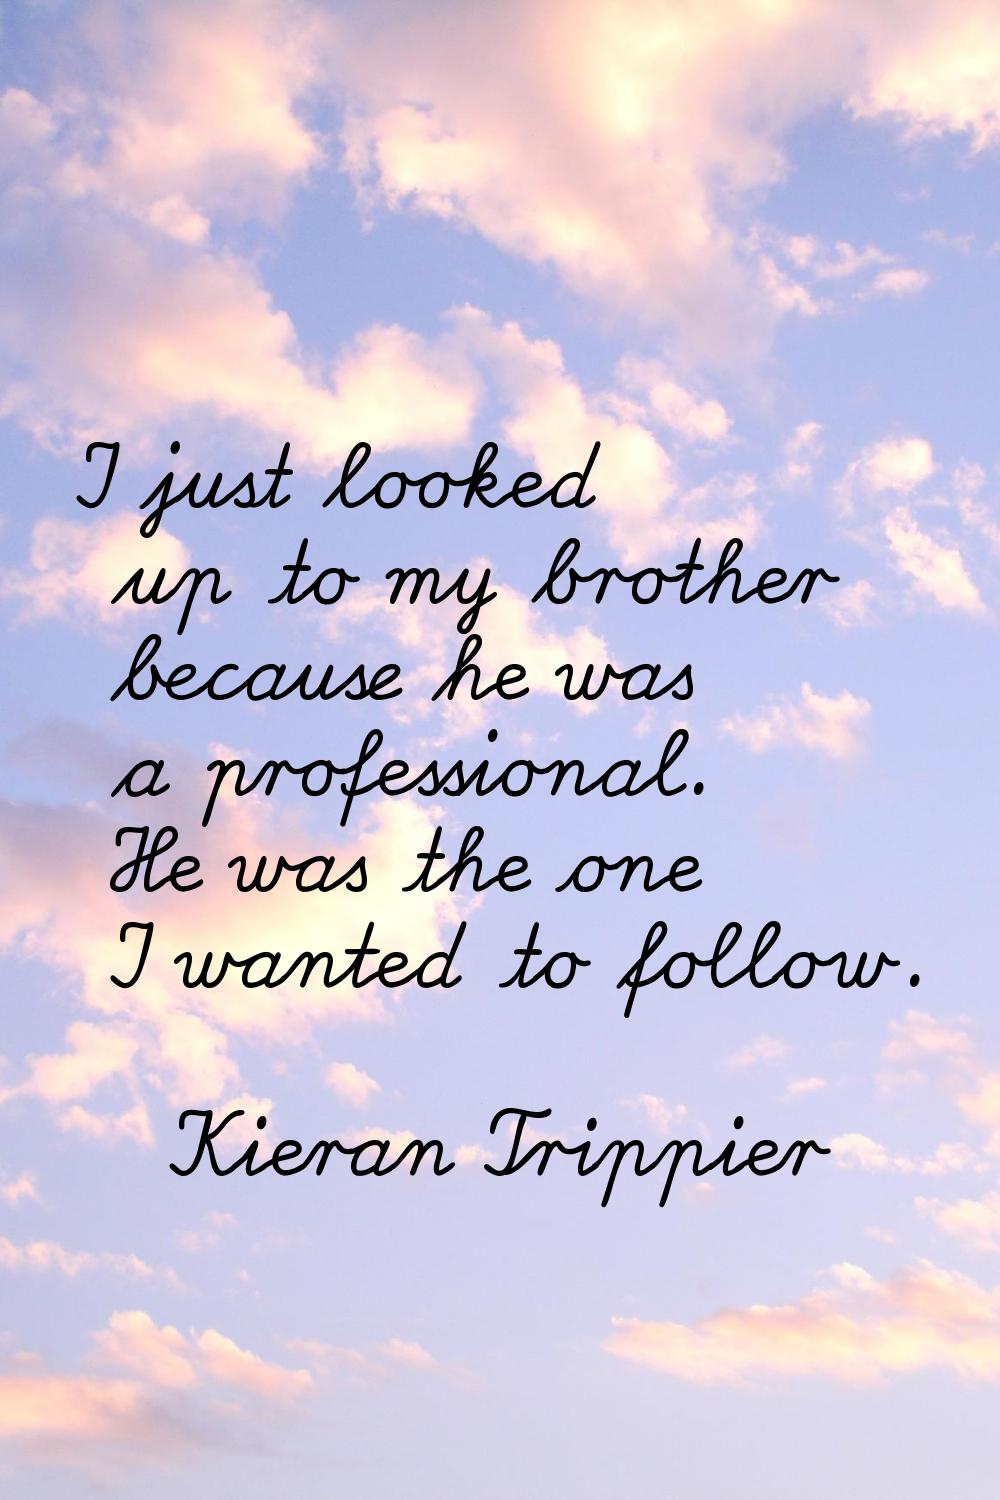 I just looked up to my brother because he was a professional. He was the one I wanted to follow.